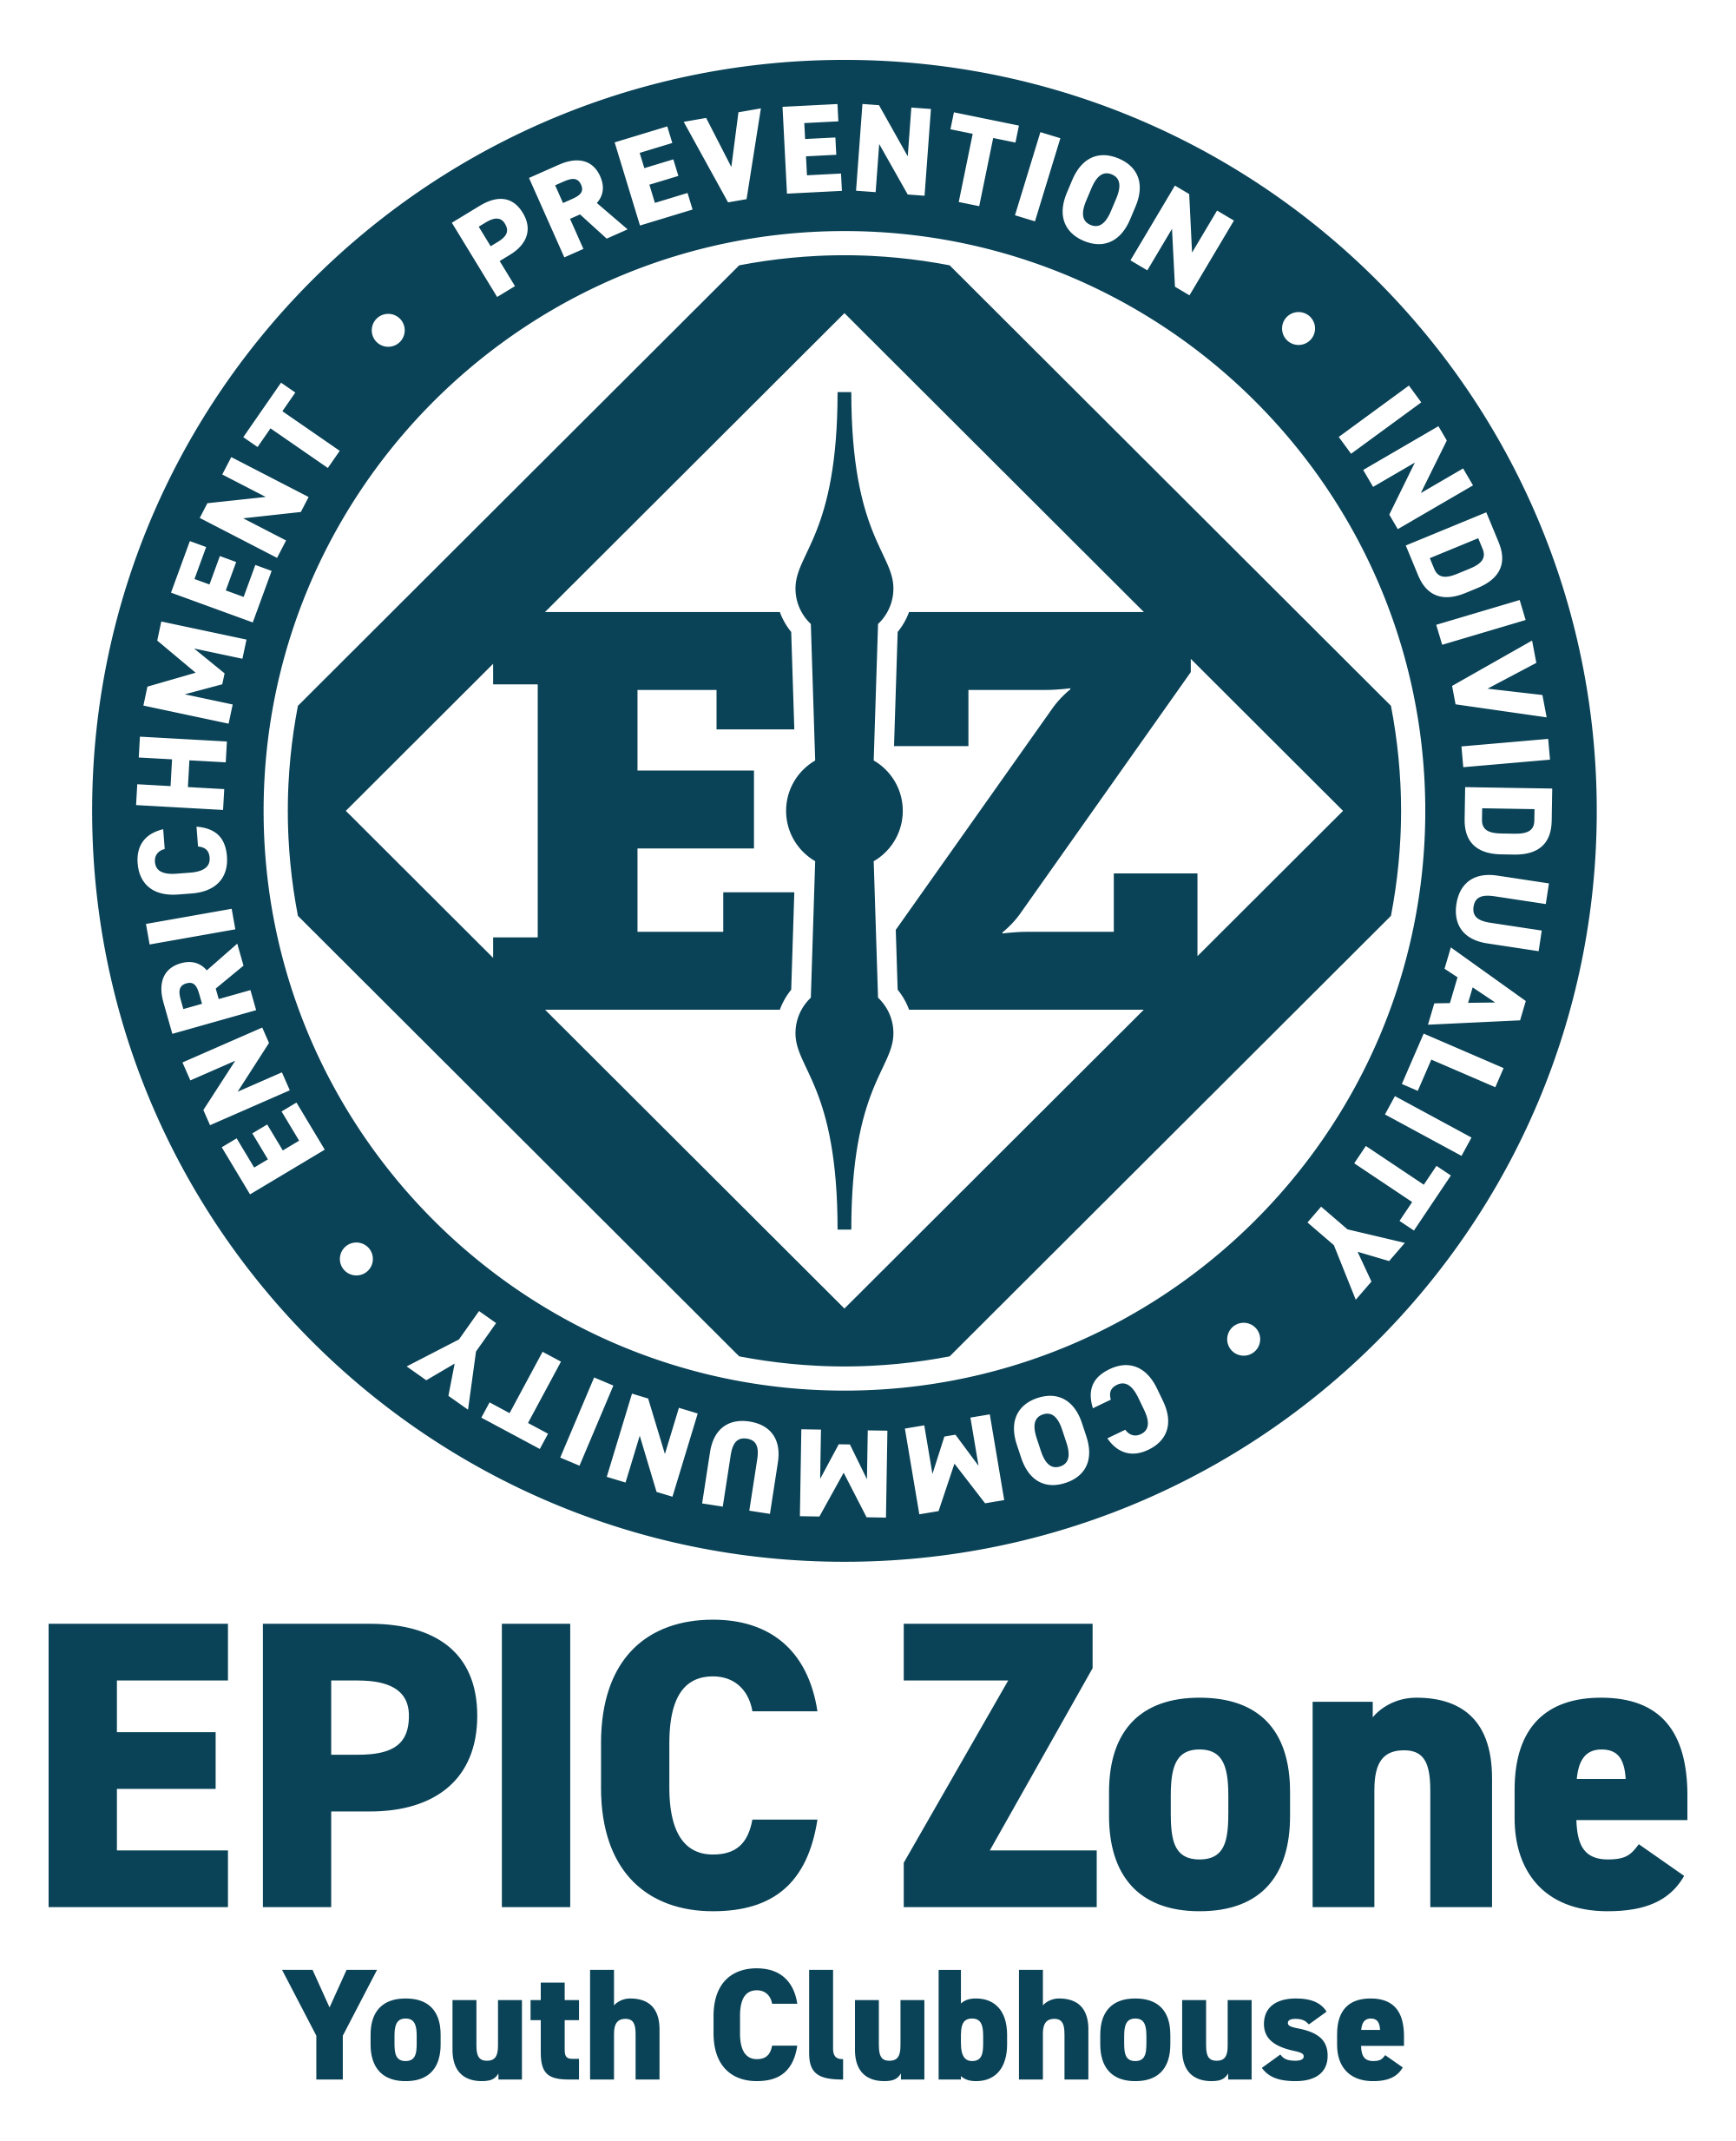 EPIC Zone - A Youth Clubhouse